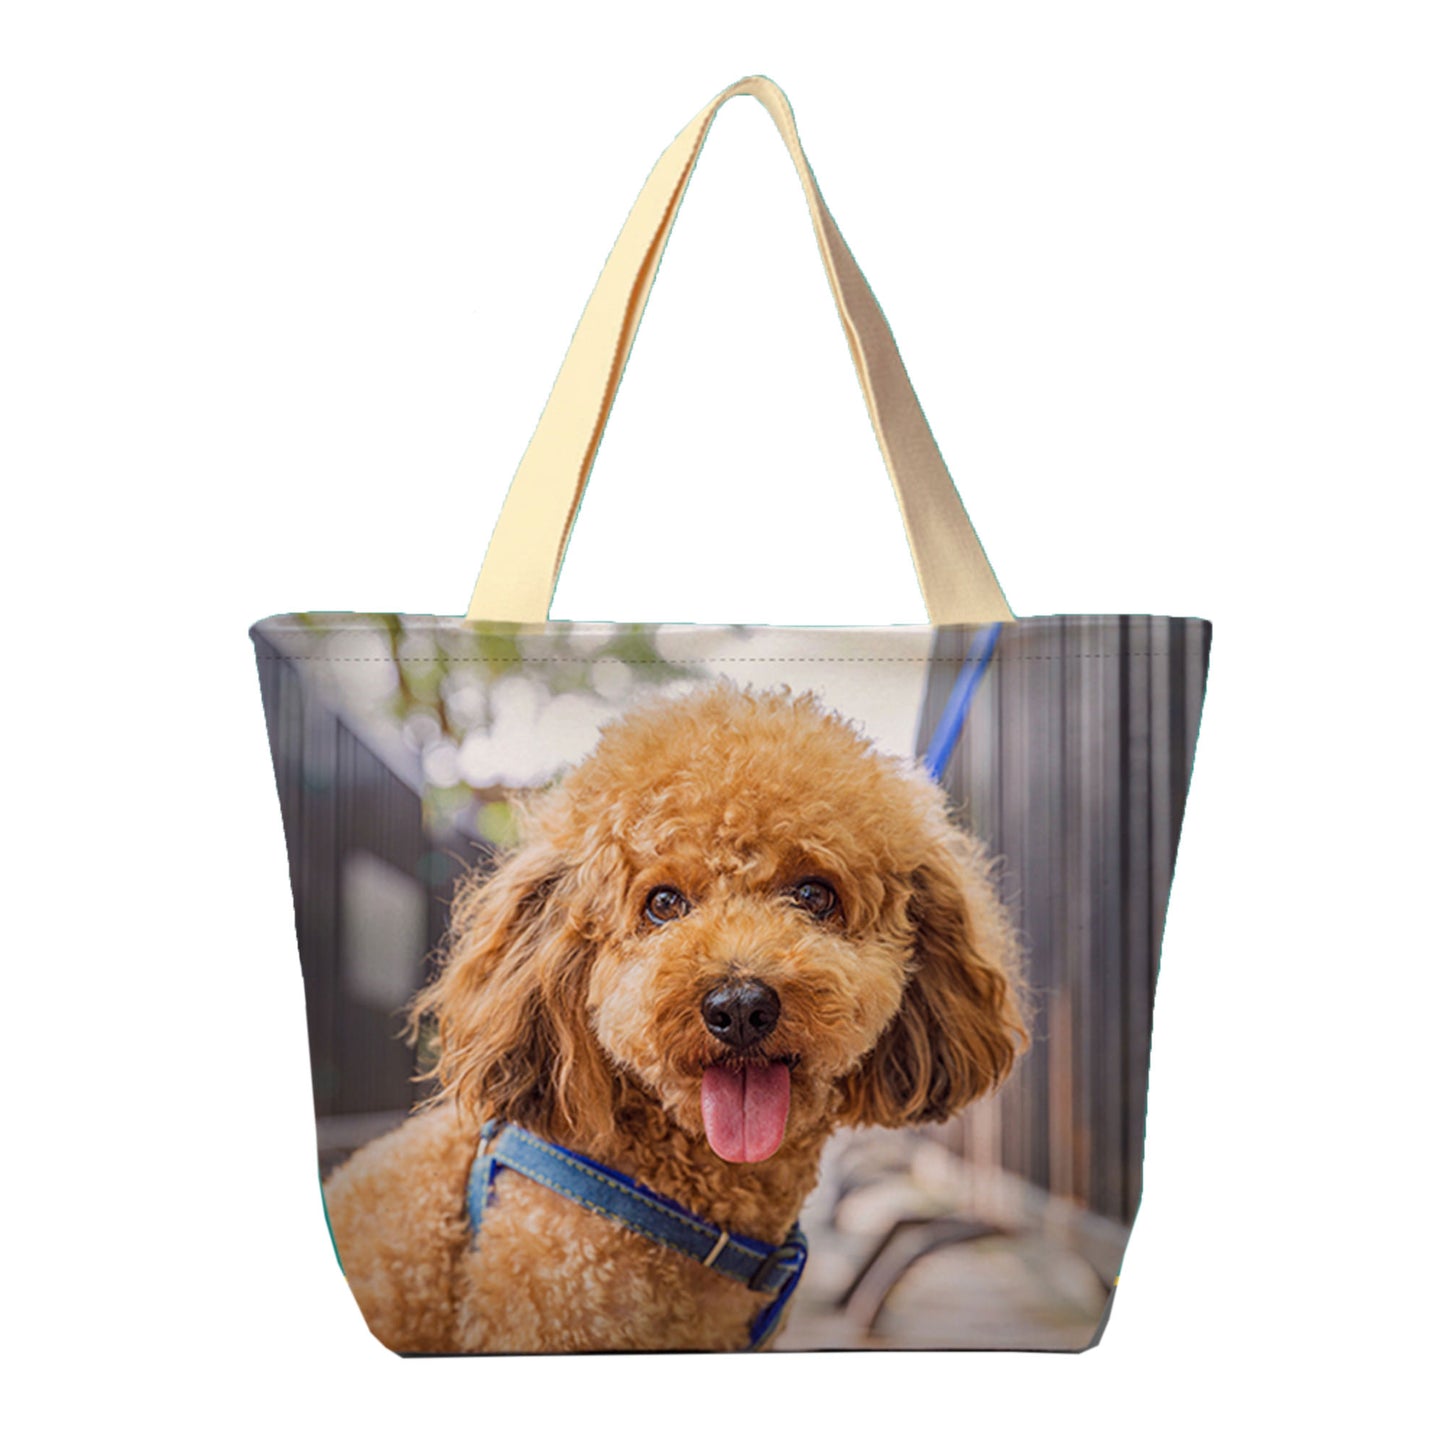 A personalized all-over print tote bag with a photo of a dog on it.